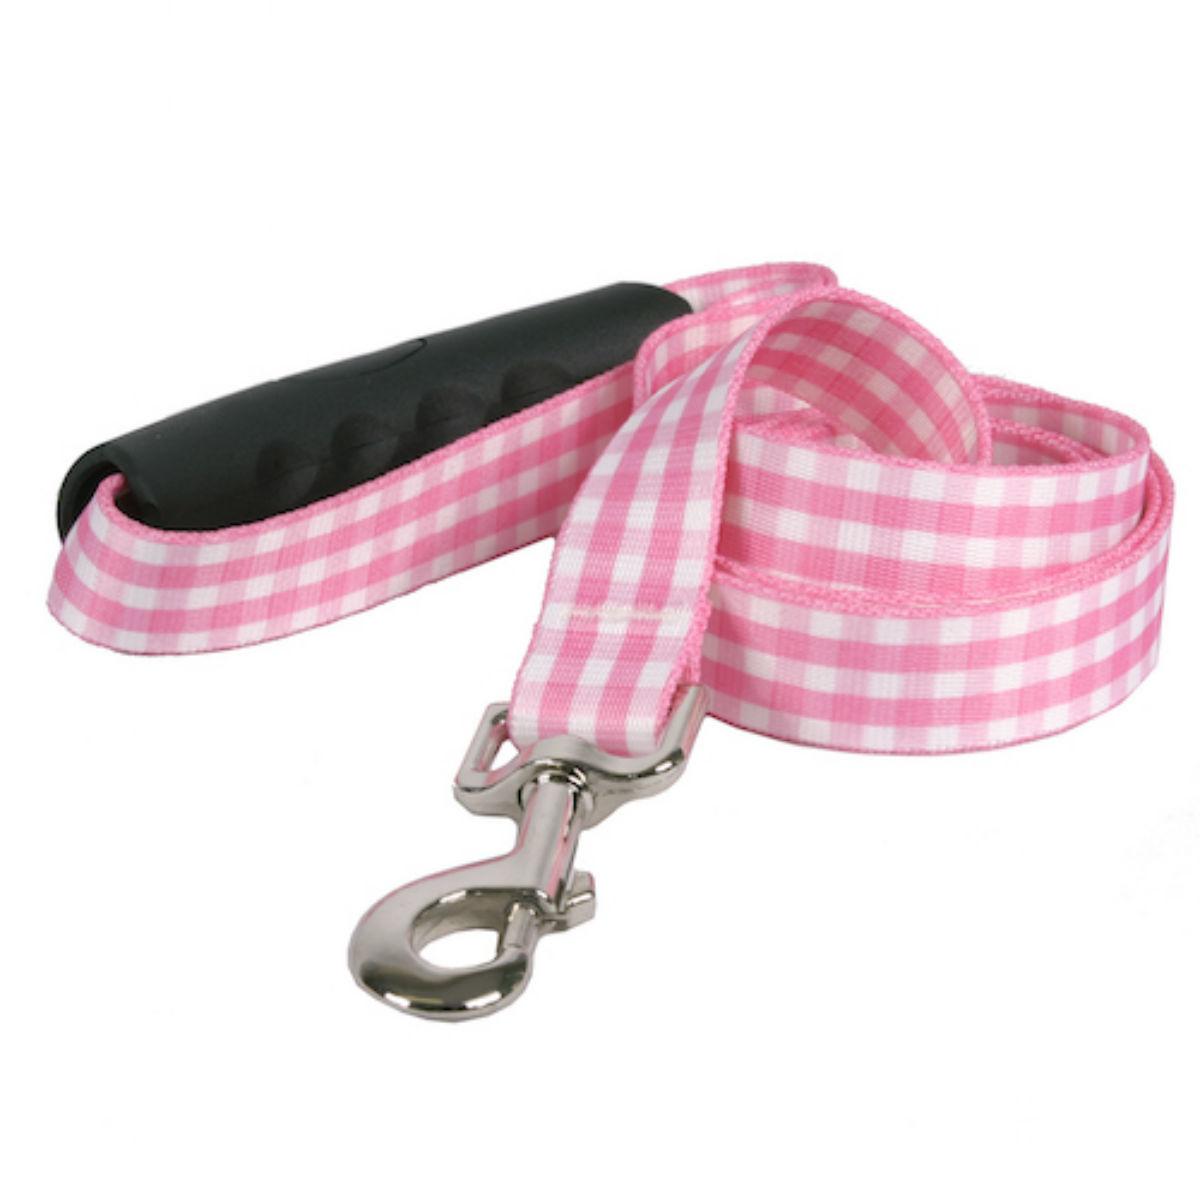 Southern Dawg Gingham EZ-Grip Dog Leash by Yellow Dog - Pink